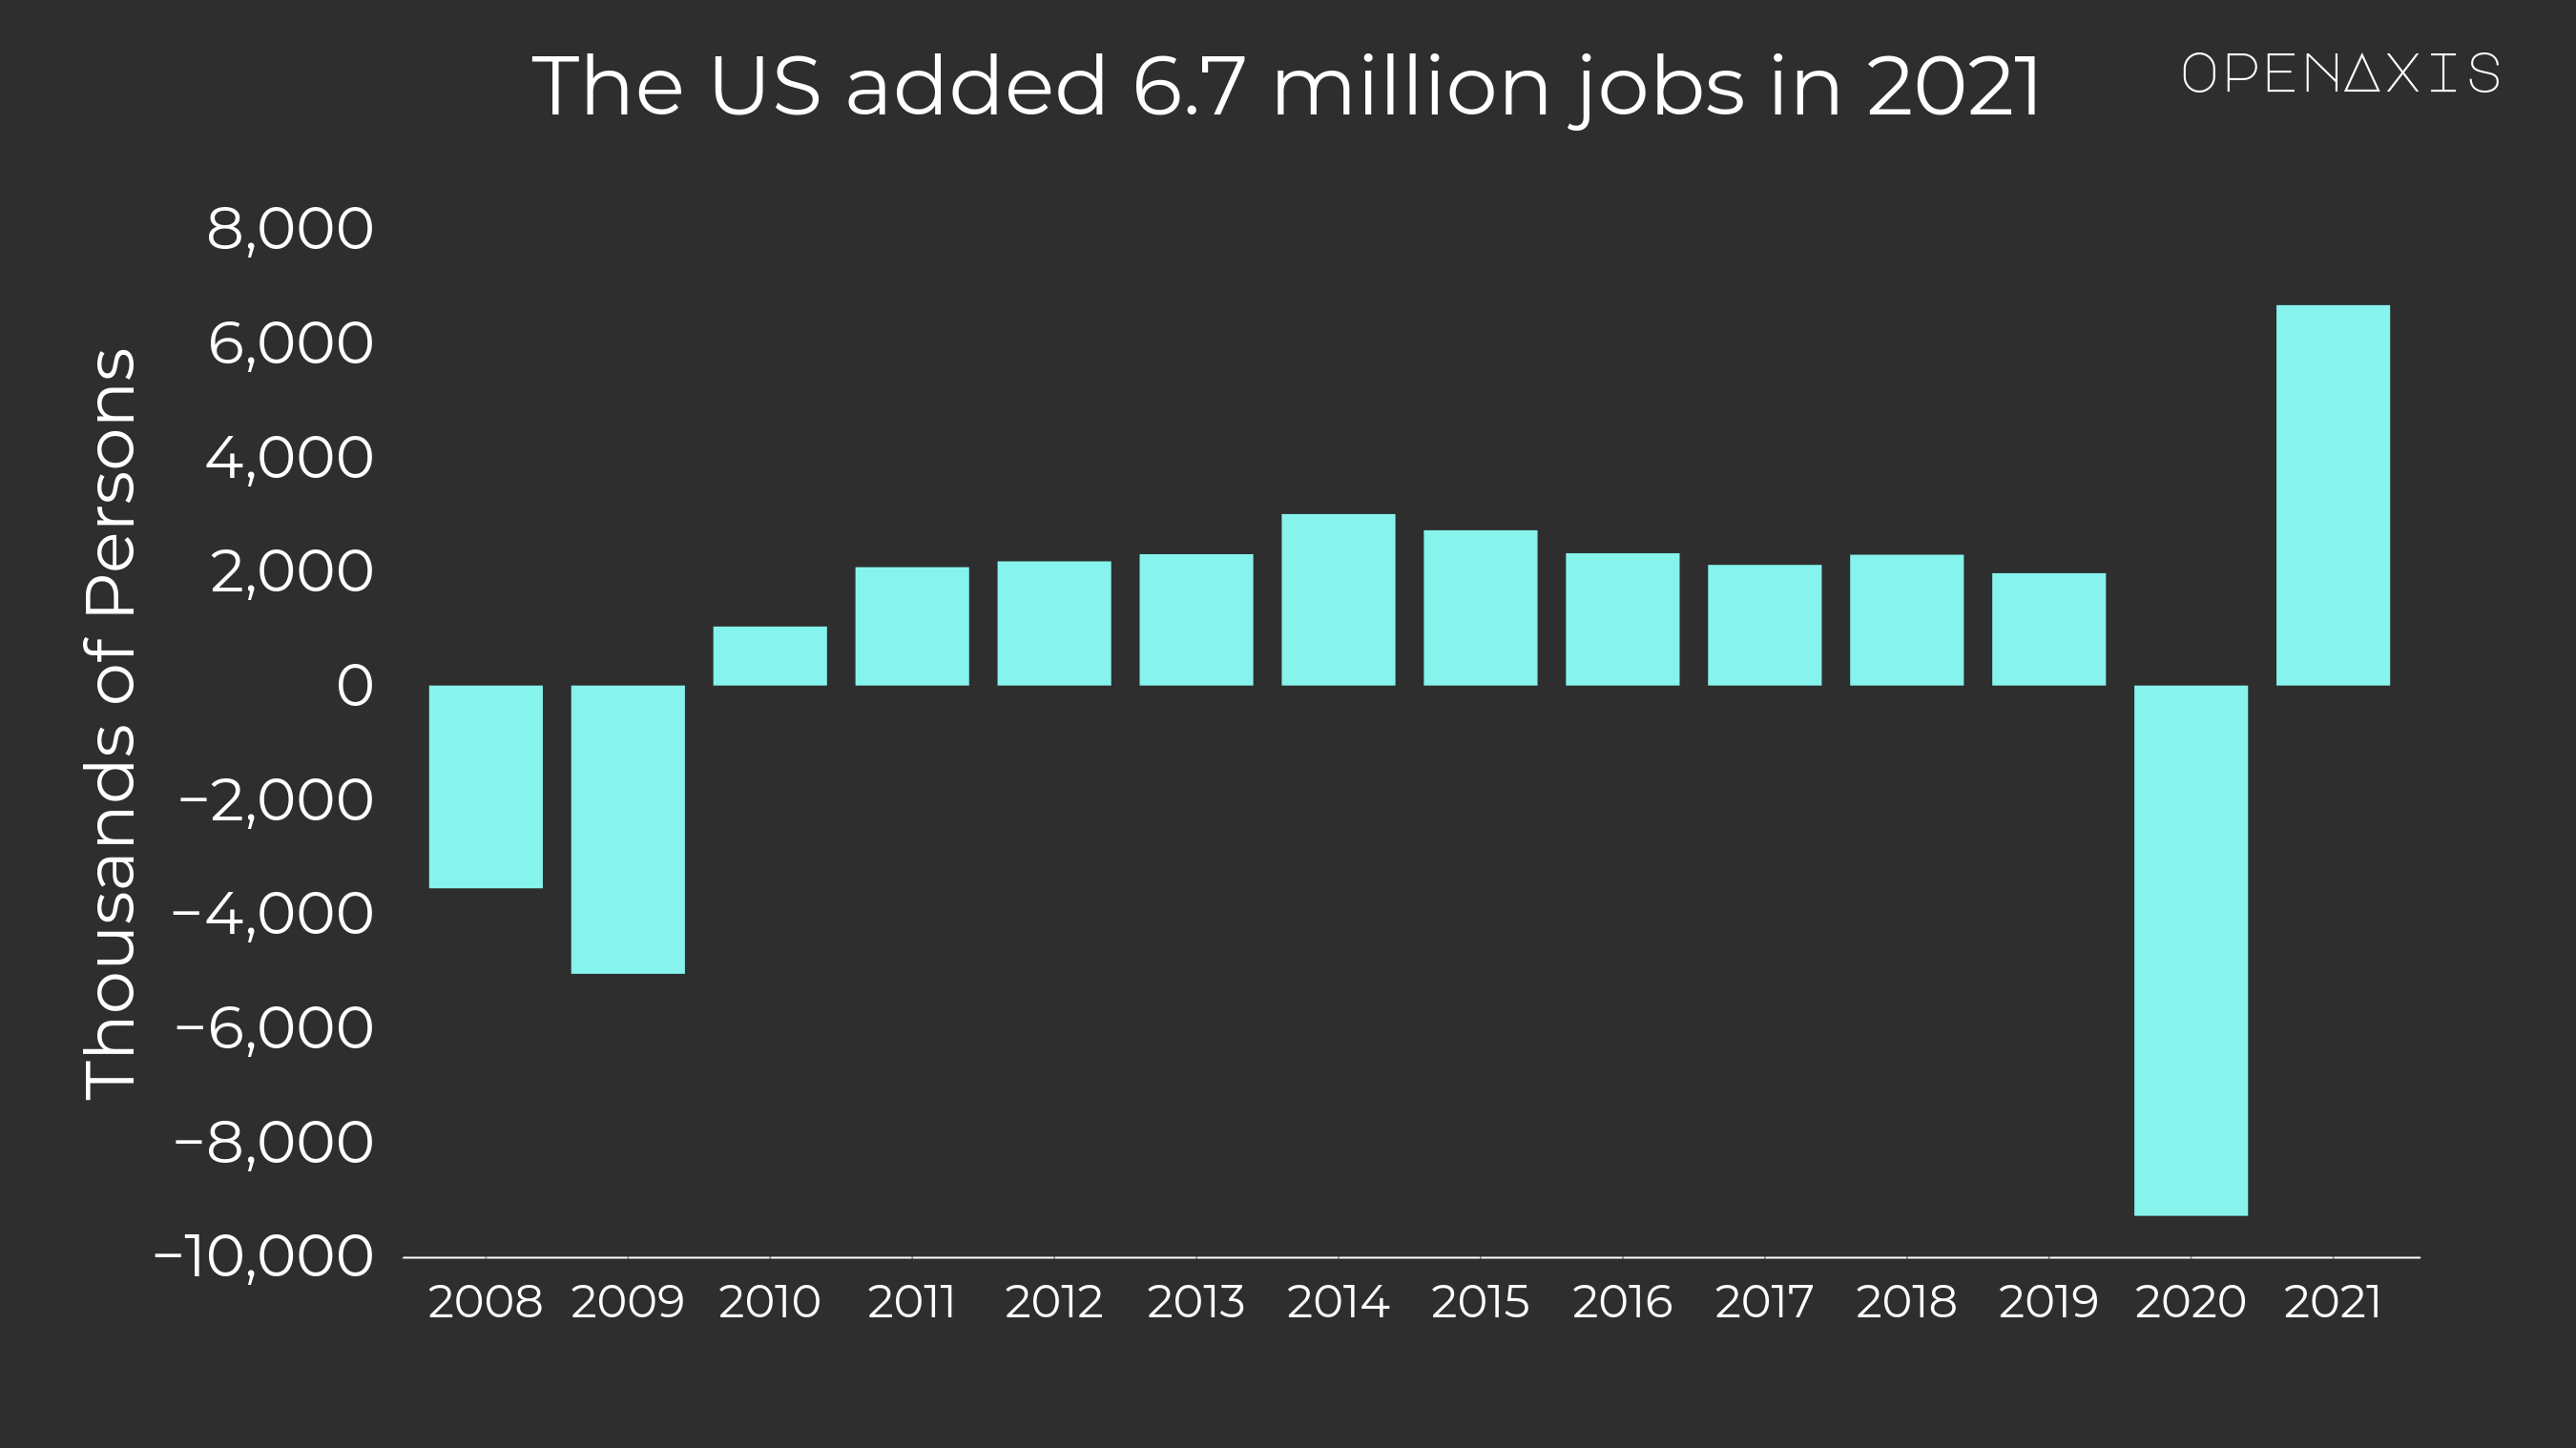 "The US added 6.7 million jobs in 2021"